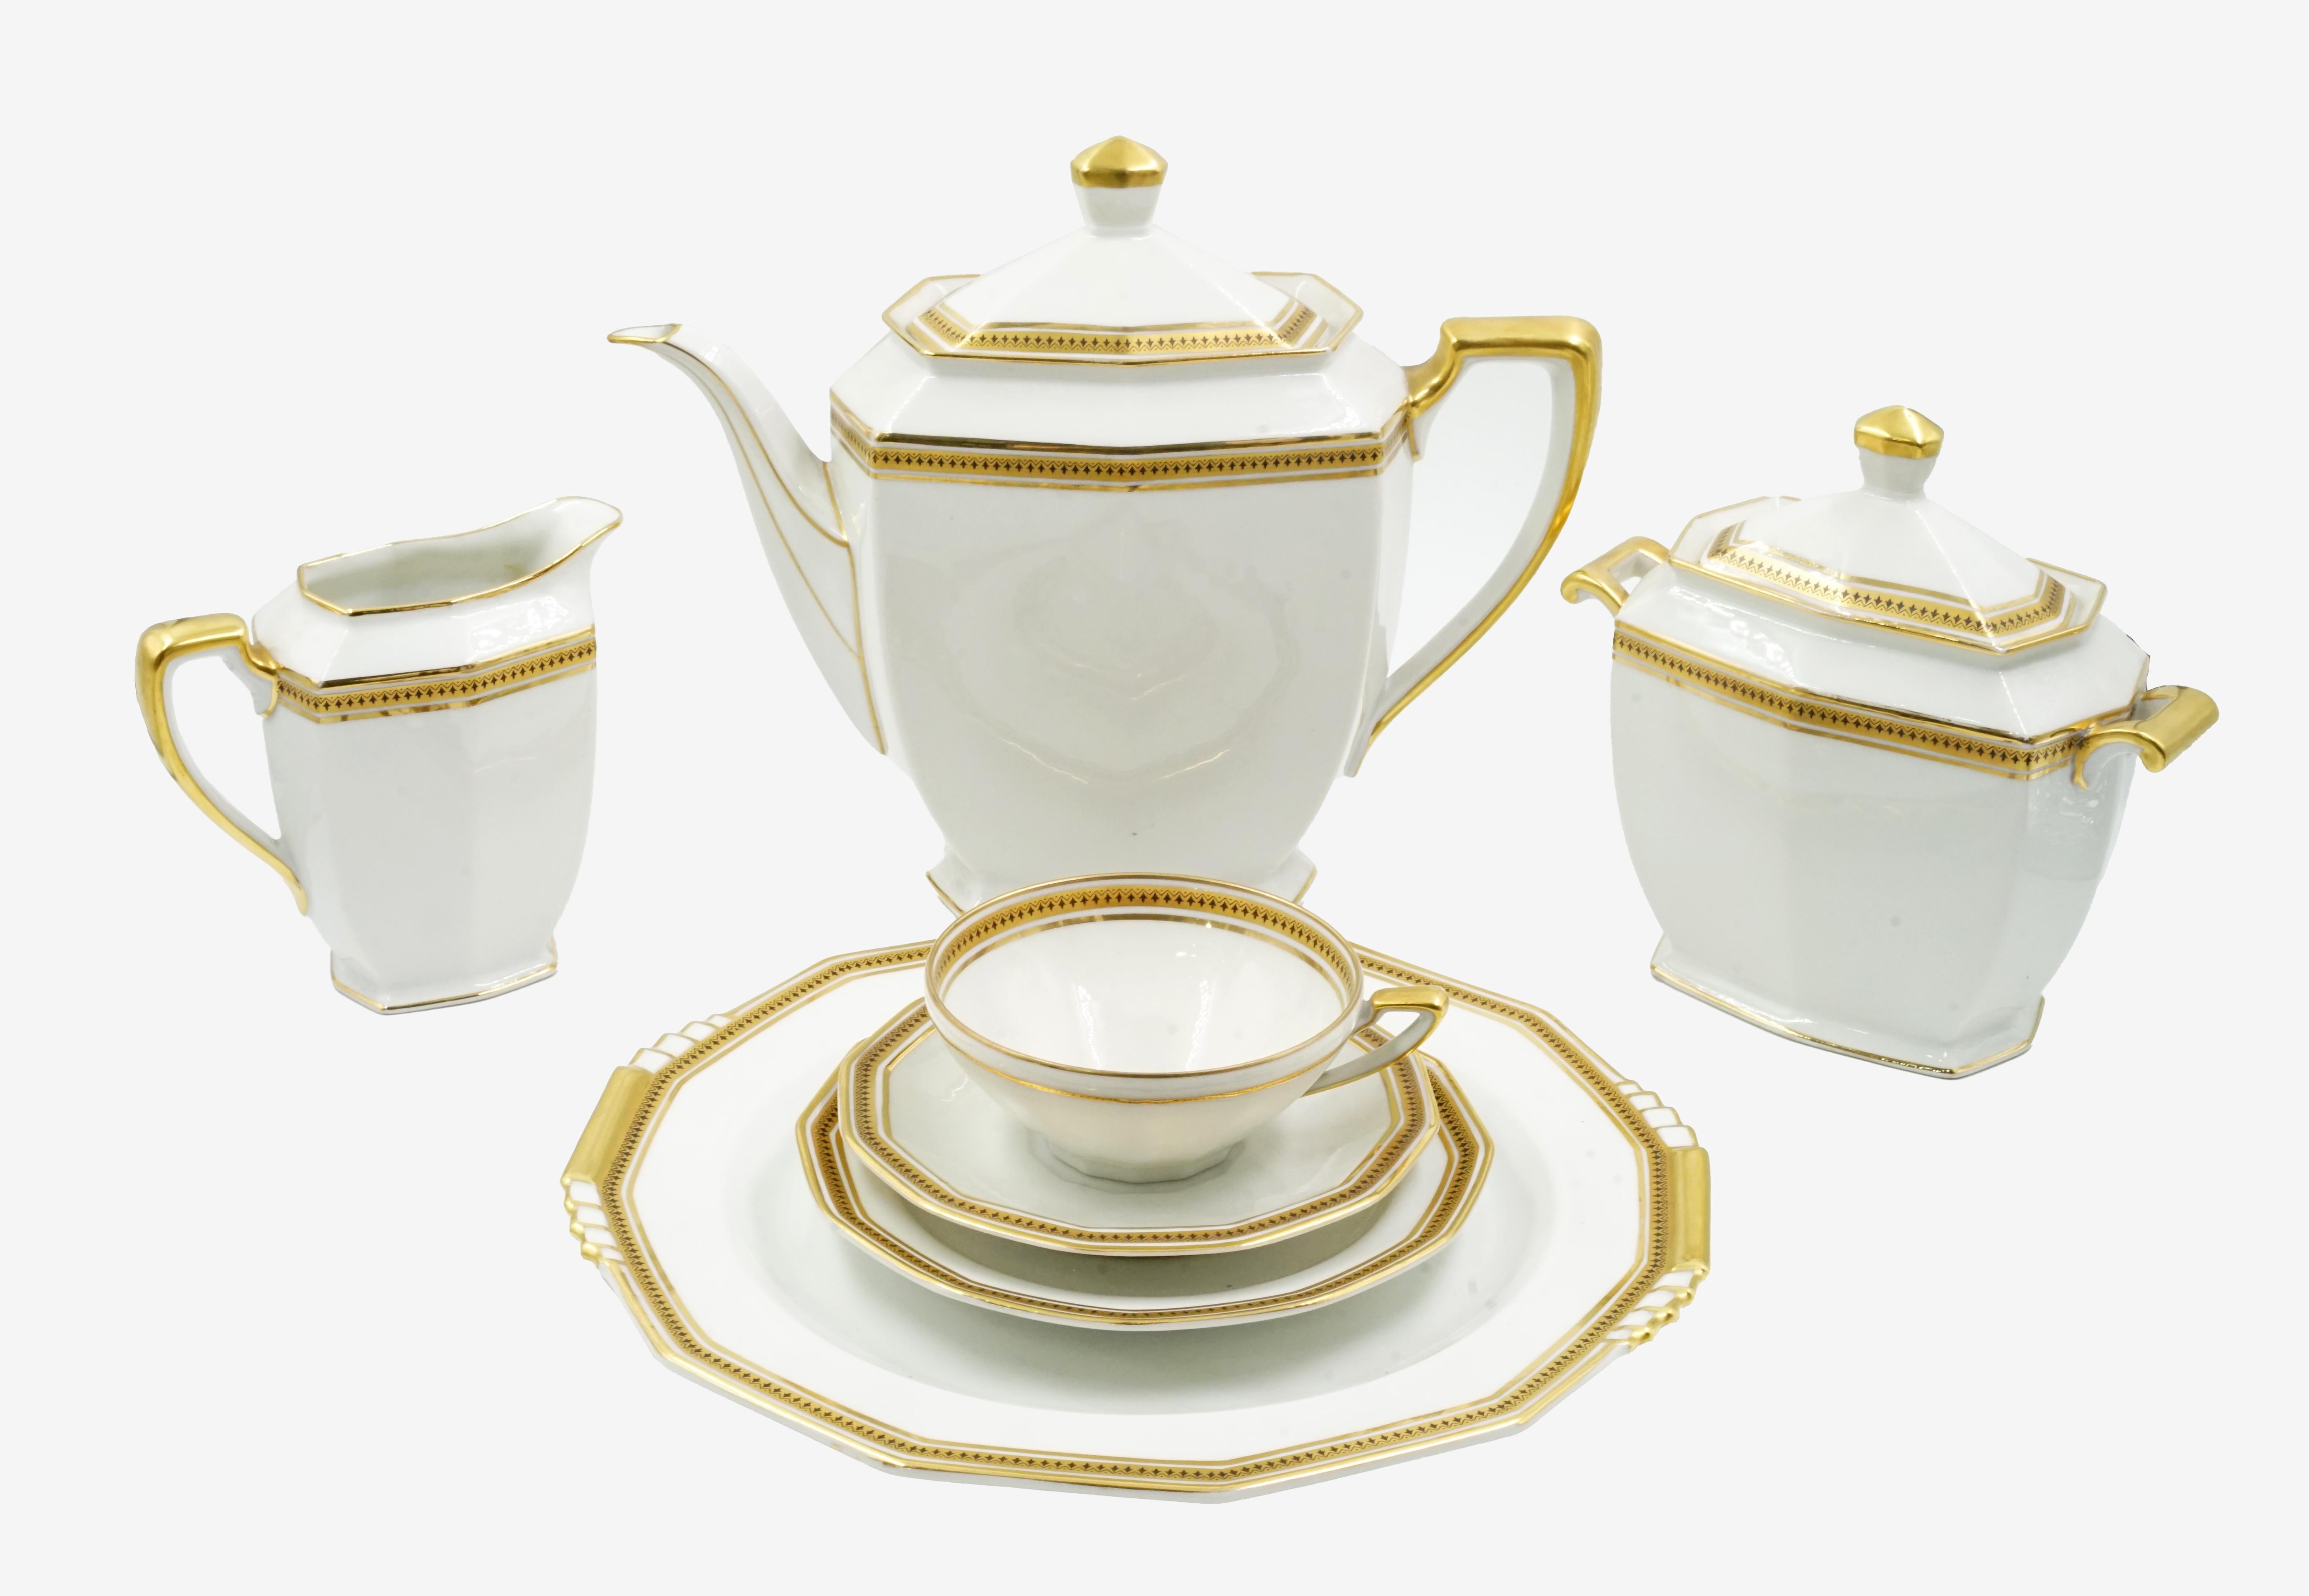 Art deco Limoges porcelain coffee set
Complete coffee set for 12 people
40 pieces in total
Art deco design
Origin Franca Circa 1940
The coffee set is composed of:
(measurements in centimeters)

-Coffee maker (height: 22cm   width: 26cm depth: